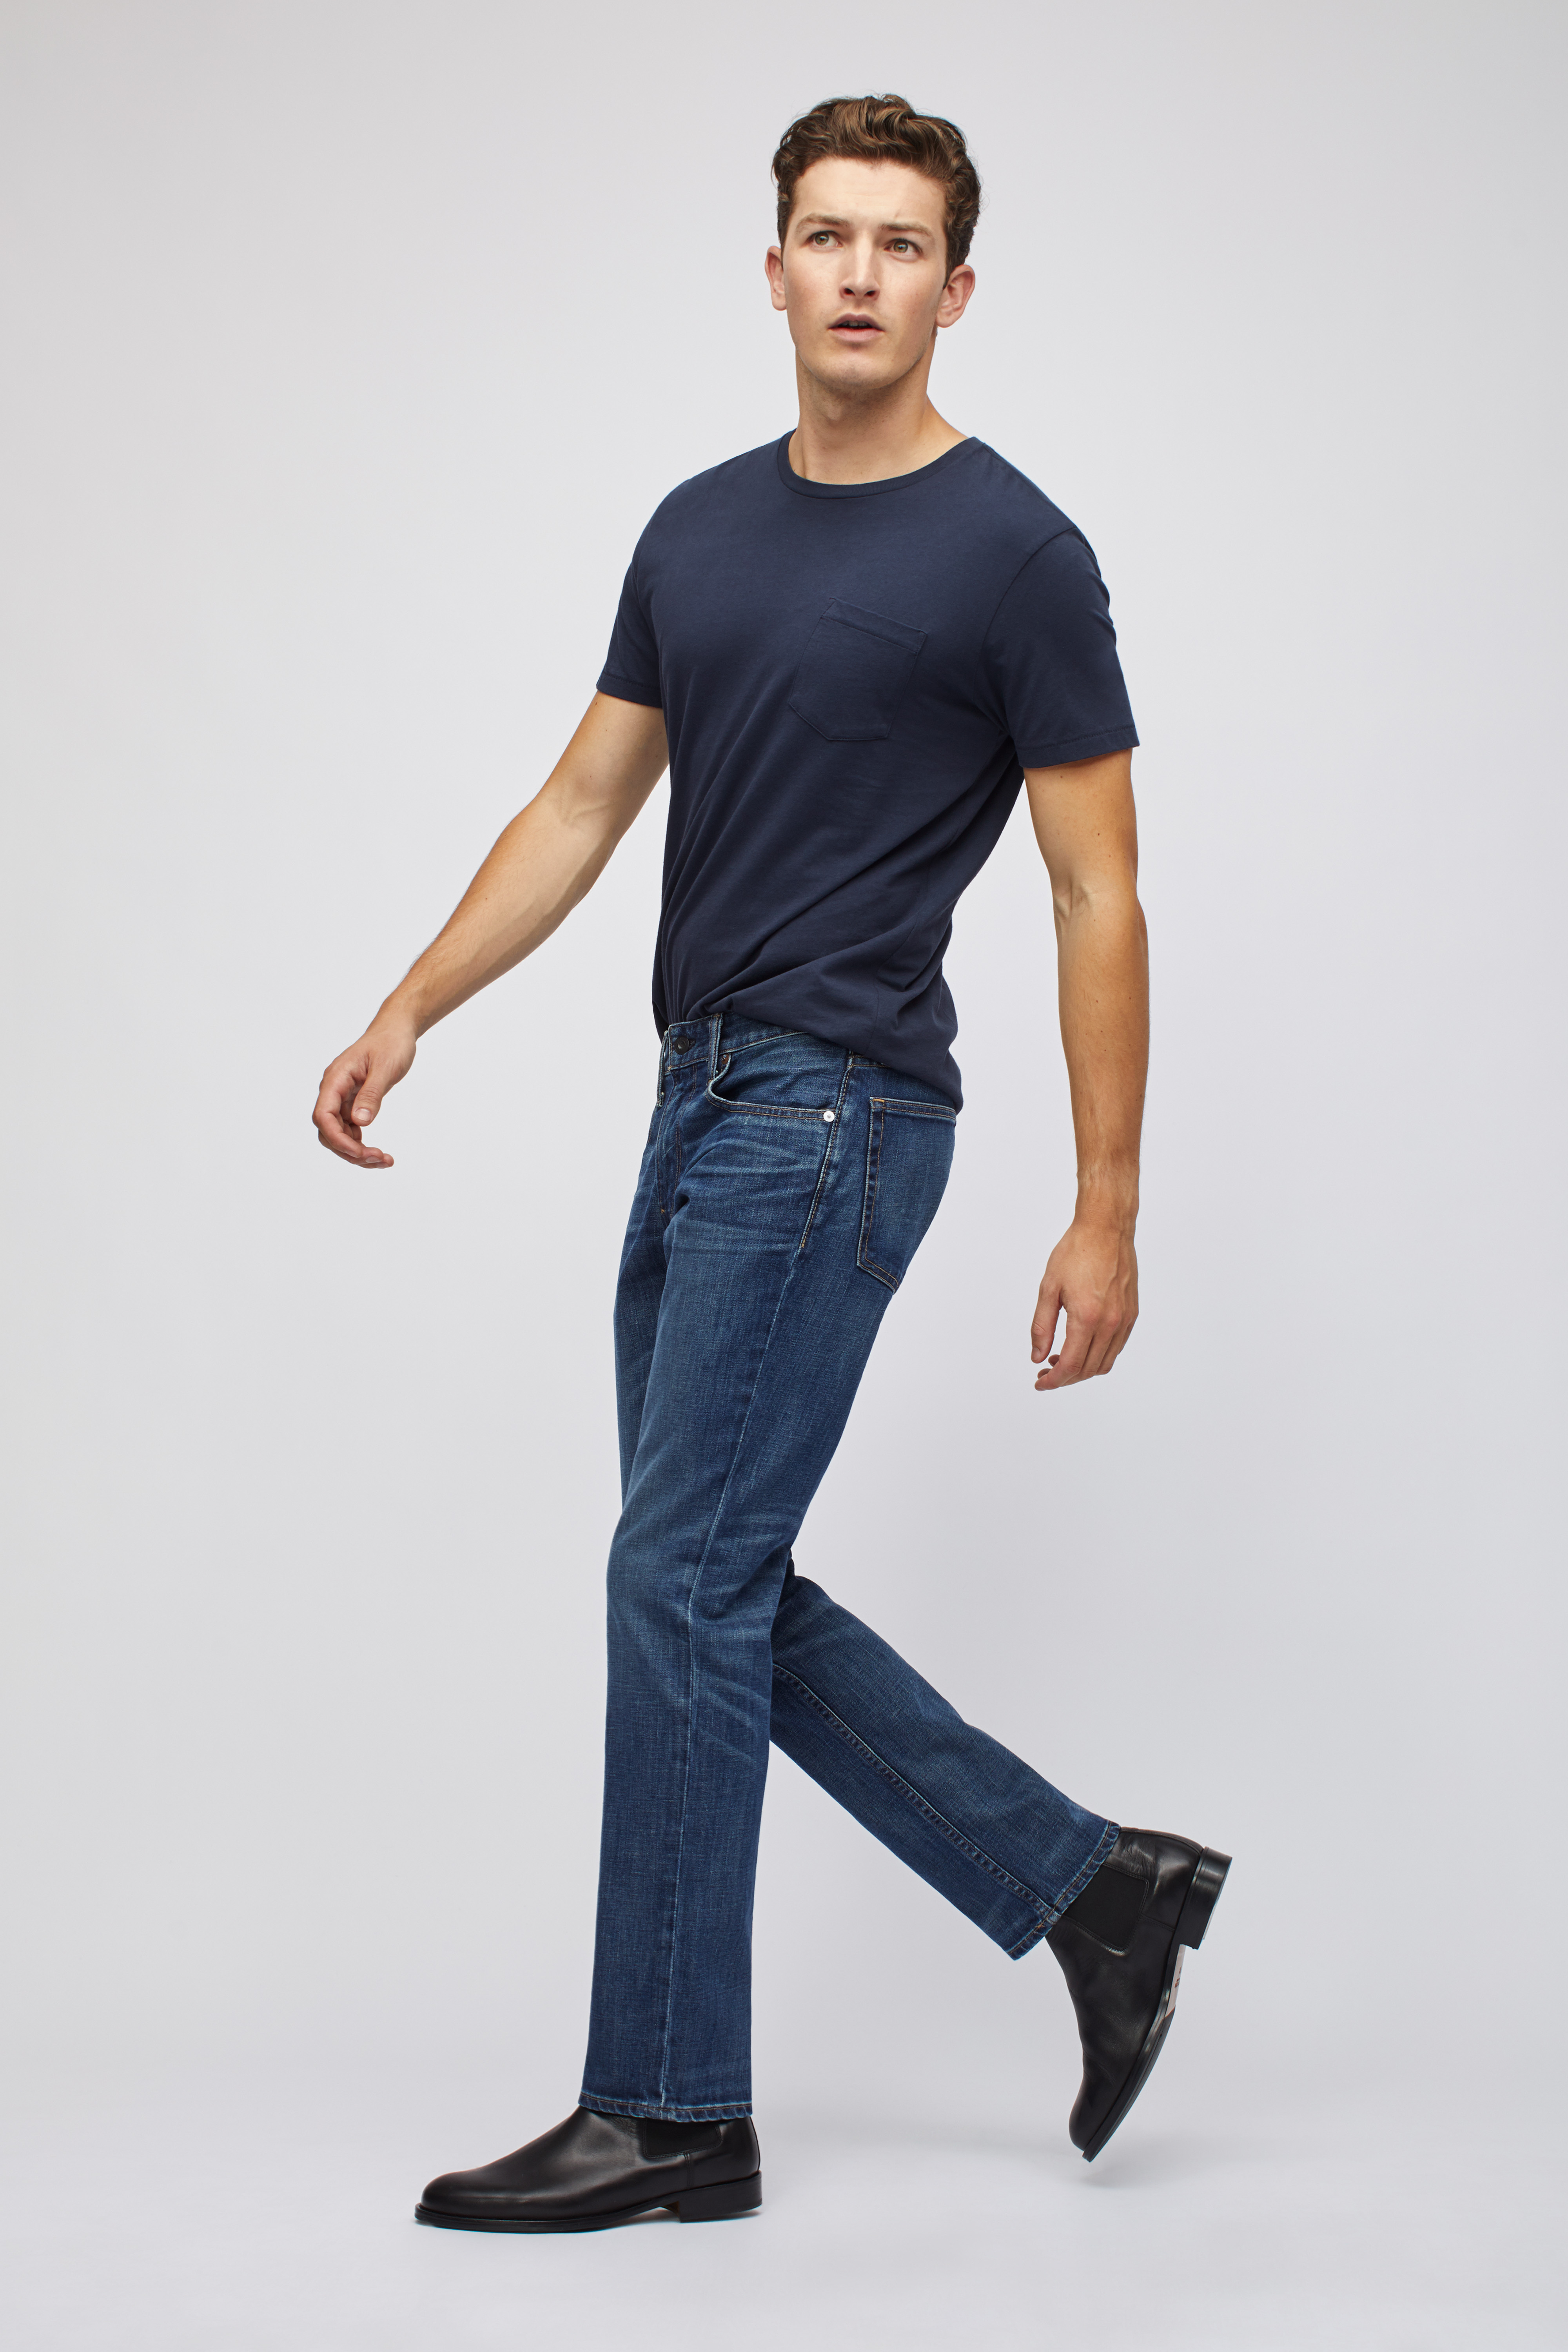 bootcut jeans 2019